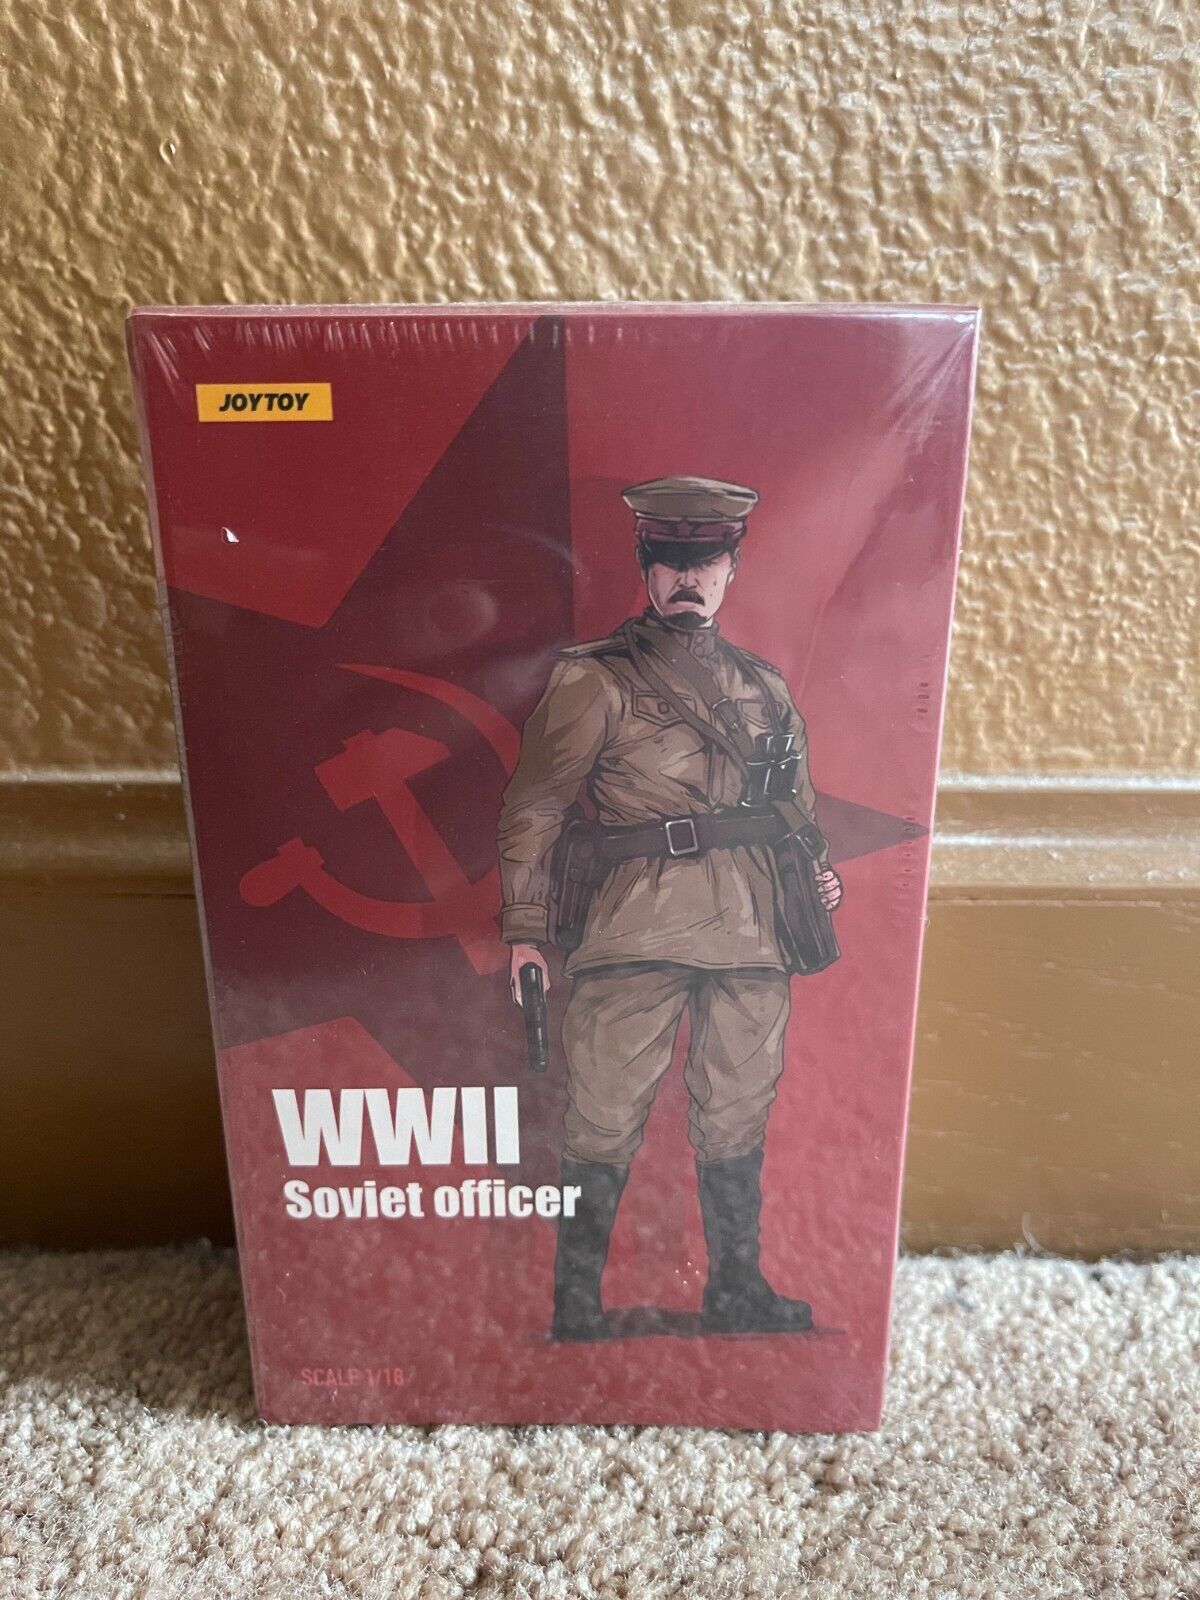 *NEW* JOYTOY WWII SOVIET OFFICER - 1/18 Scale (3.75”/4” Scale) Action Figure